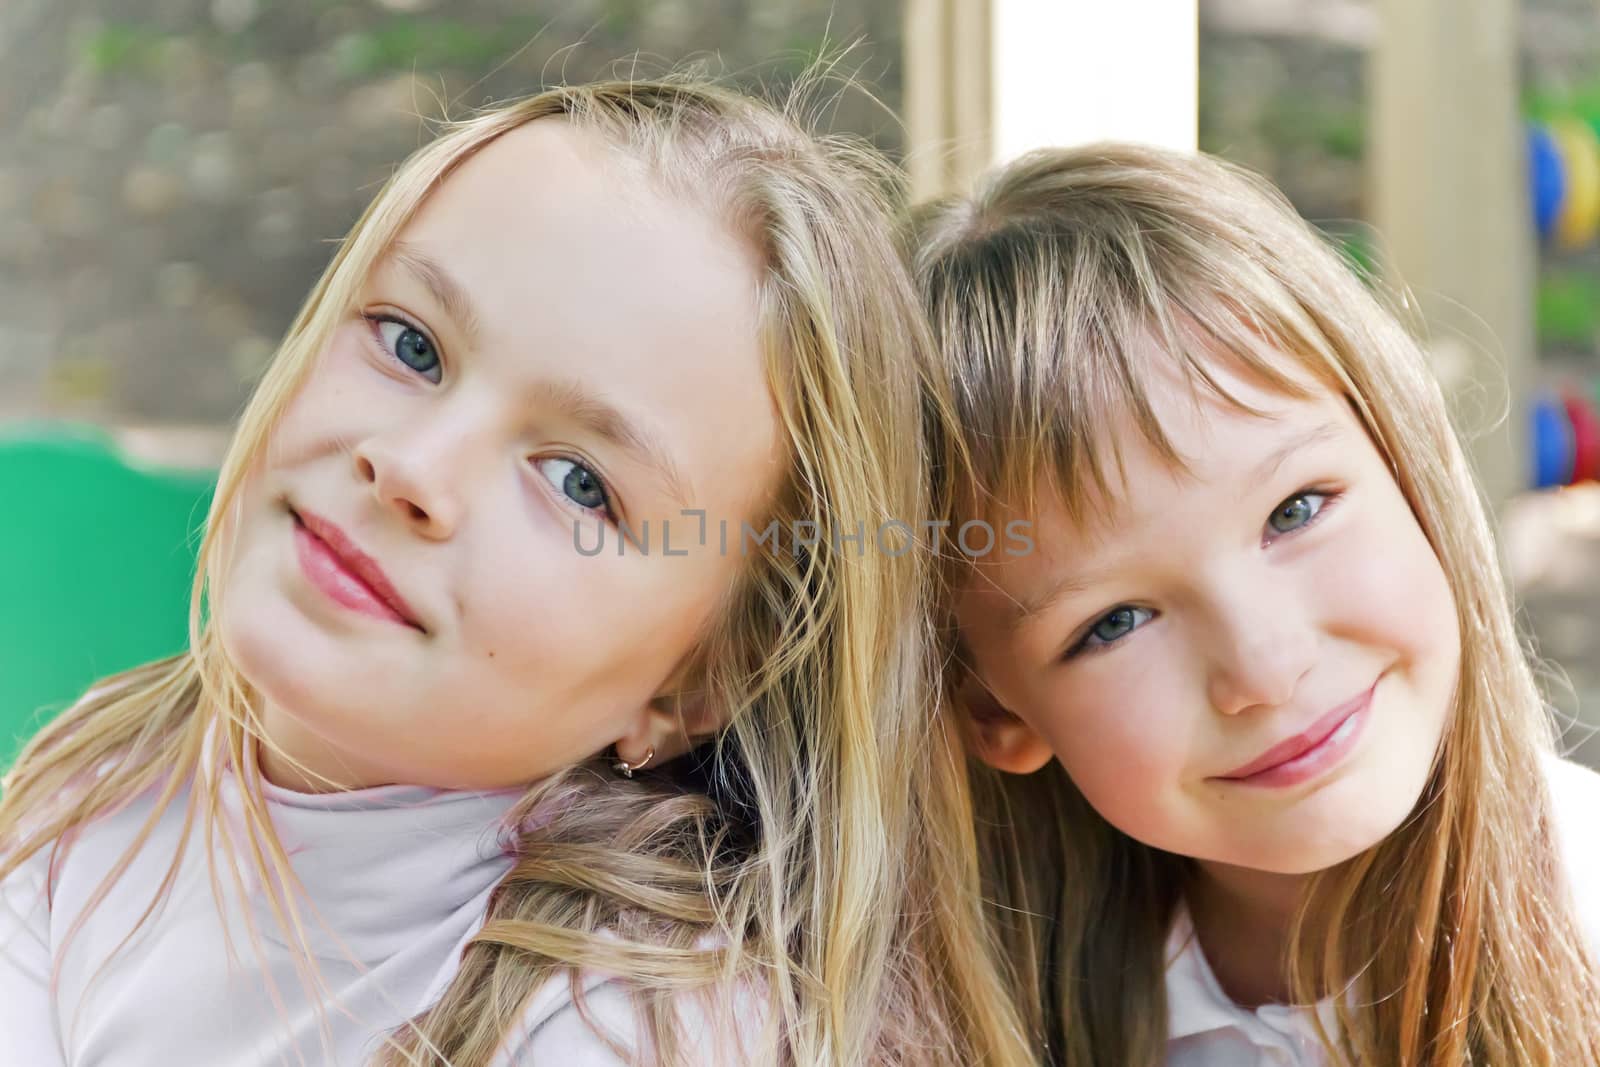 Photo of two cute girls with long hairs